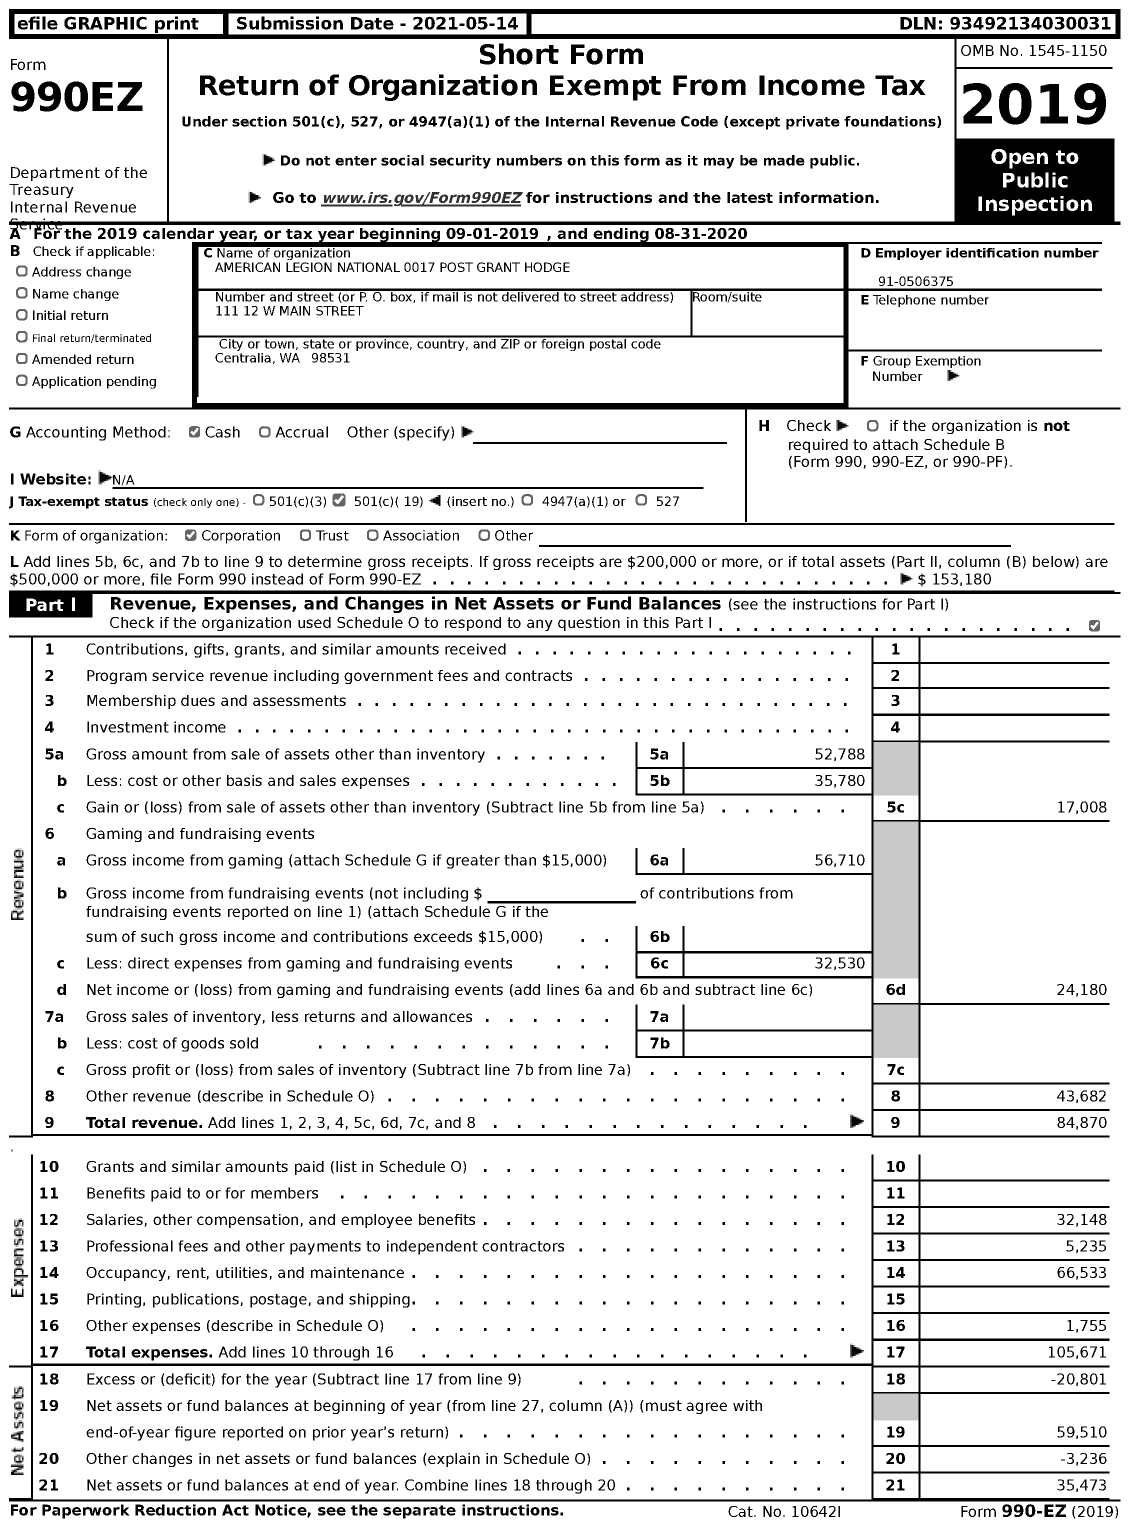 Image of first page of 2019 Form 990EZ for American Legion National 0017 Post Grant Hodge